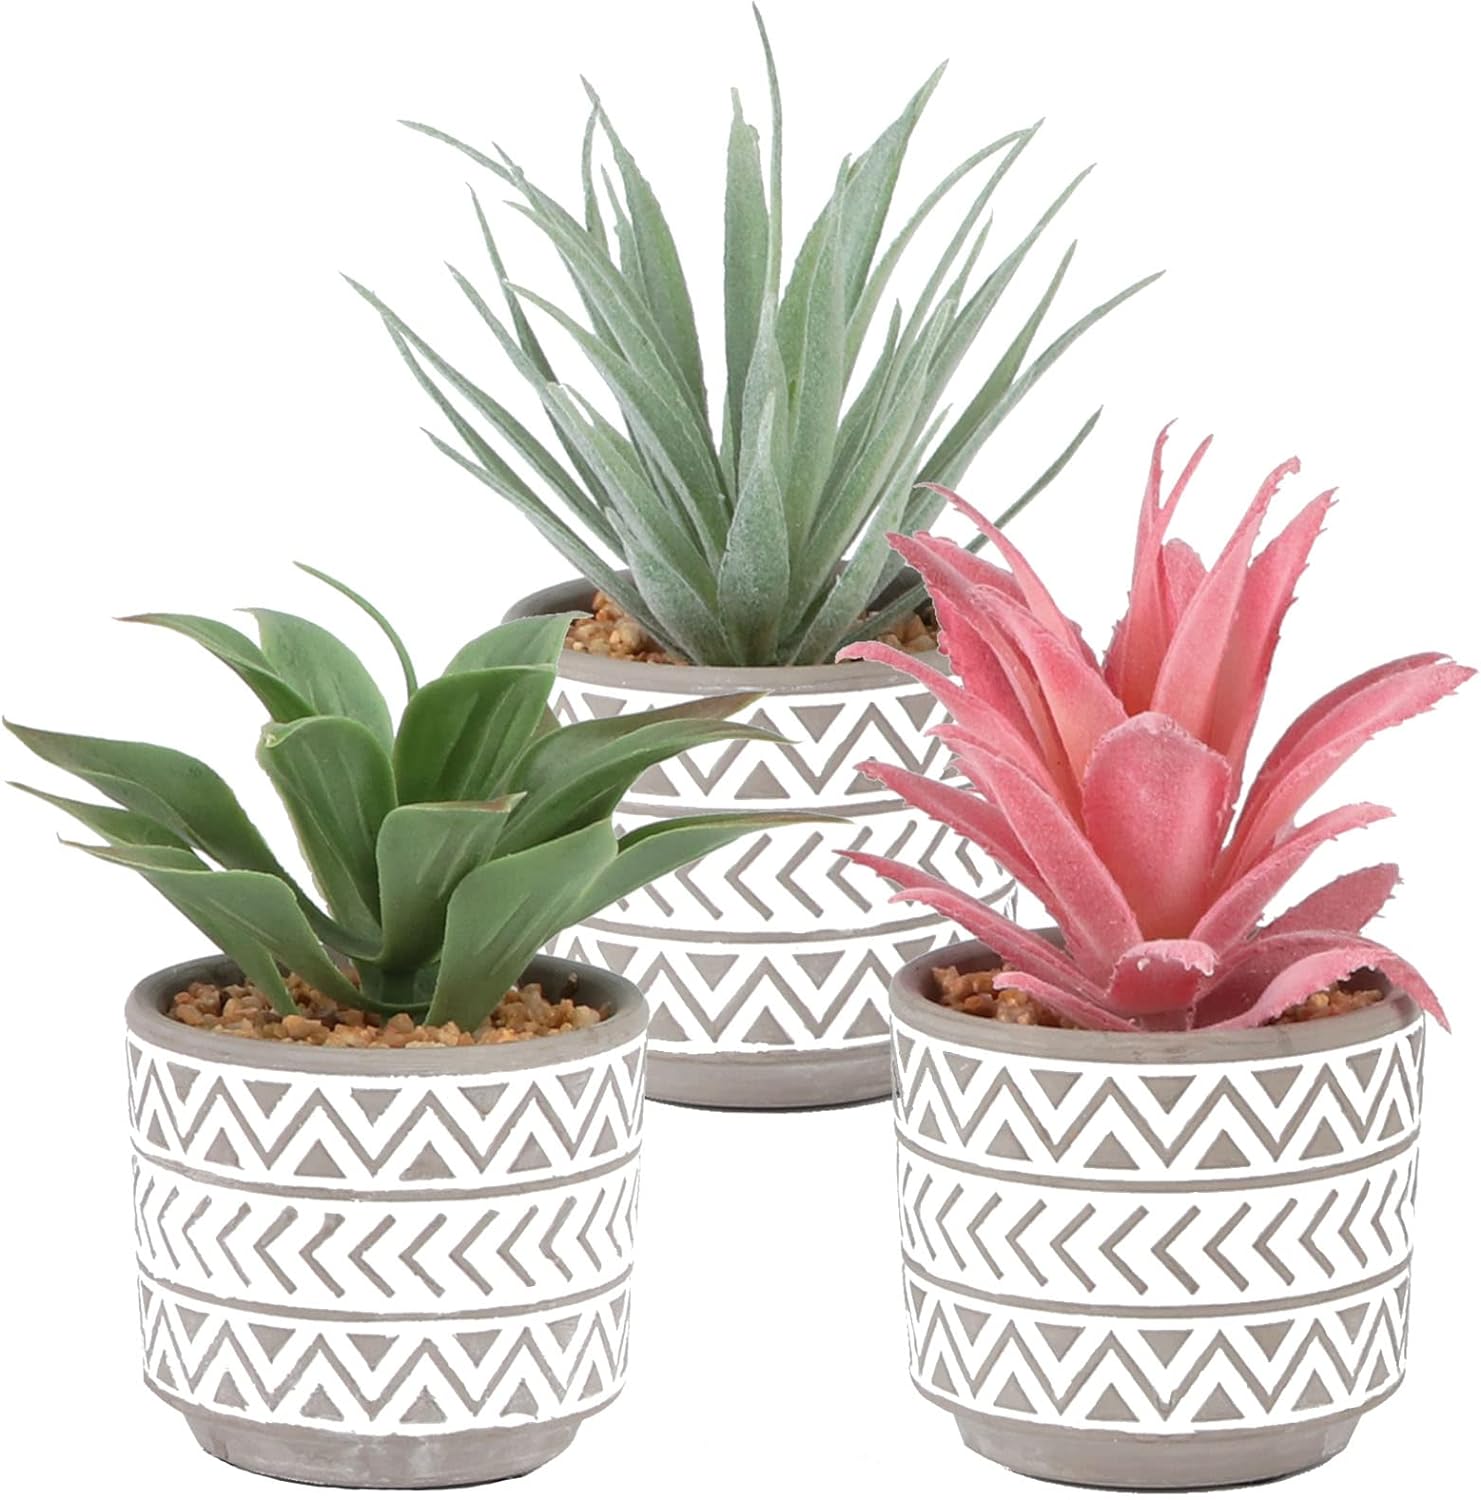 Small Artificial Succulents in Pots with White Geometric Ceramic Pots Set of 4 SOPHSEAG Succulents Plants Artificial Purple Mini Fake Succulent Plants for Home Office Desk Decor